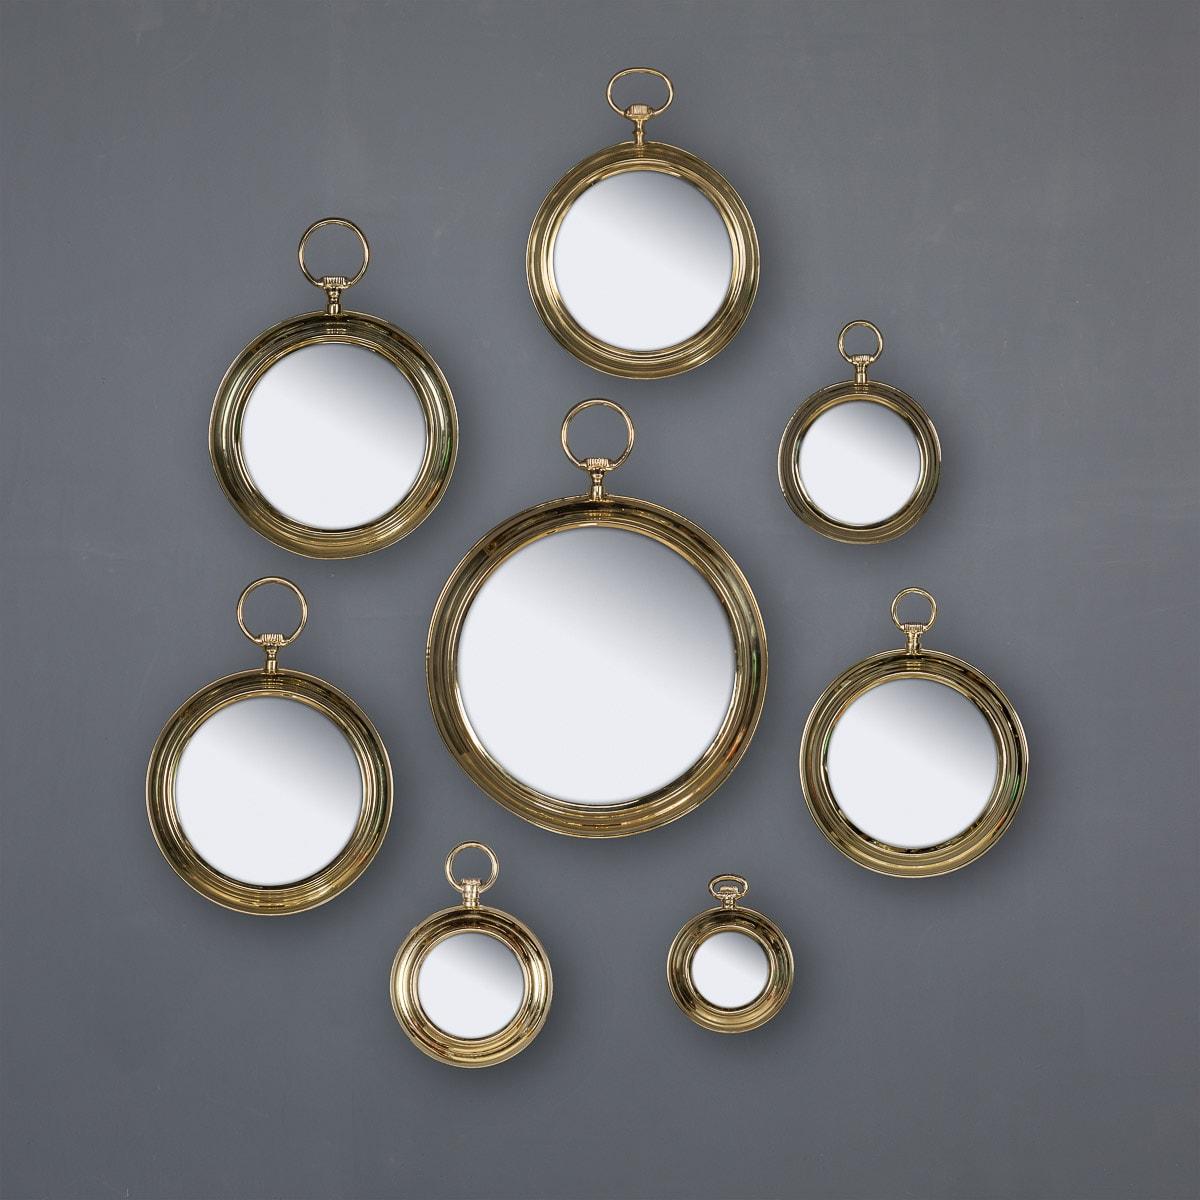 A collection of eight pocket watch shaped mirrors, this design immortalised by Fornasetti has not lost its impact since the 1940’s. This collection ranges in size and and age starting from 1950's until the 1970's.

CONDITION
In Great Condition -